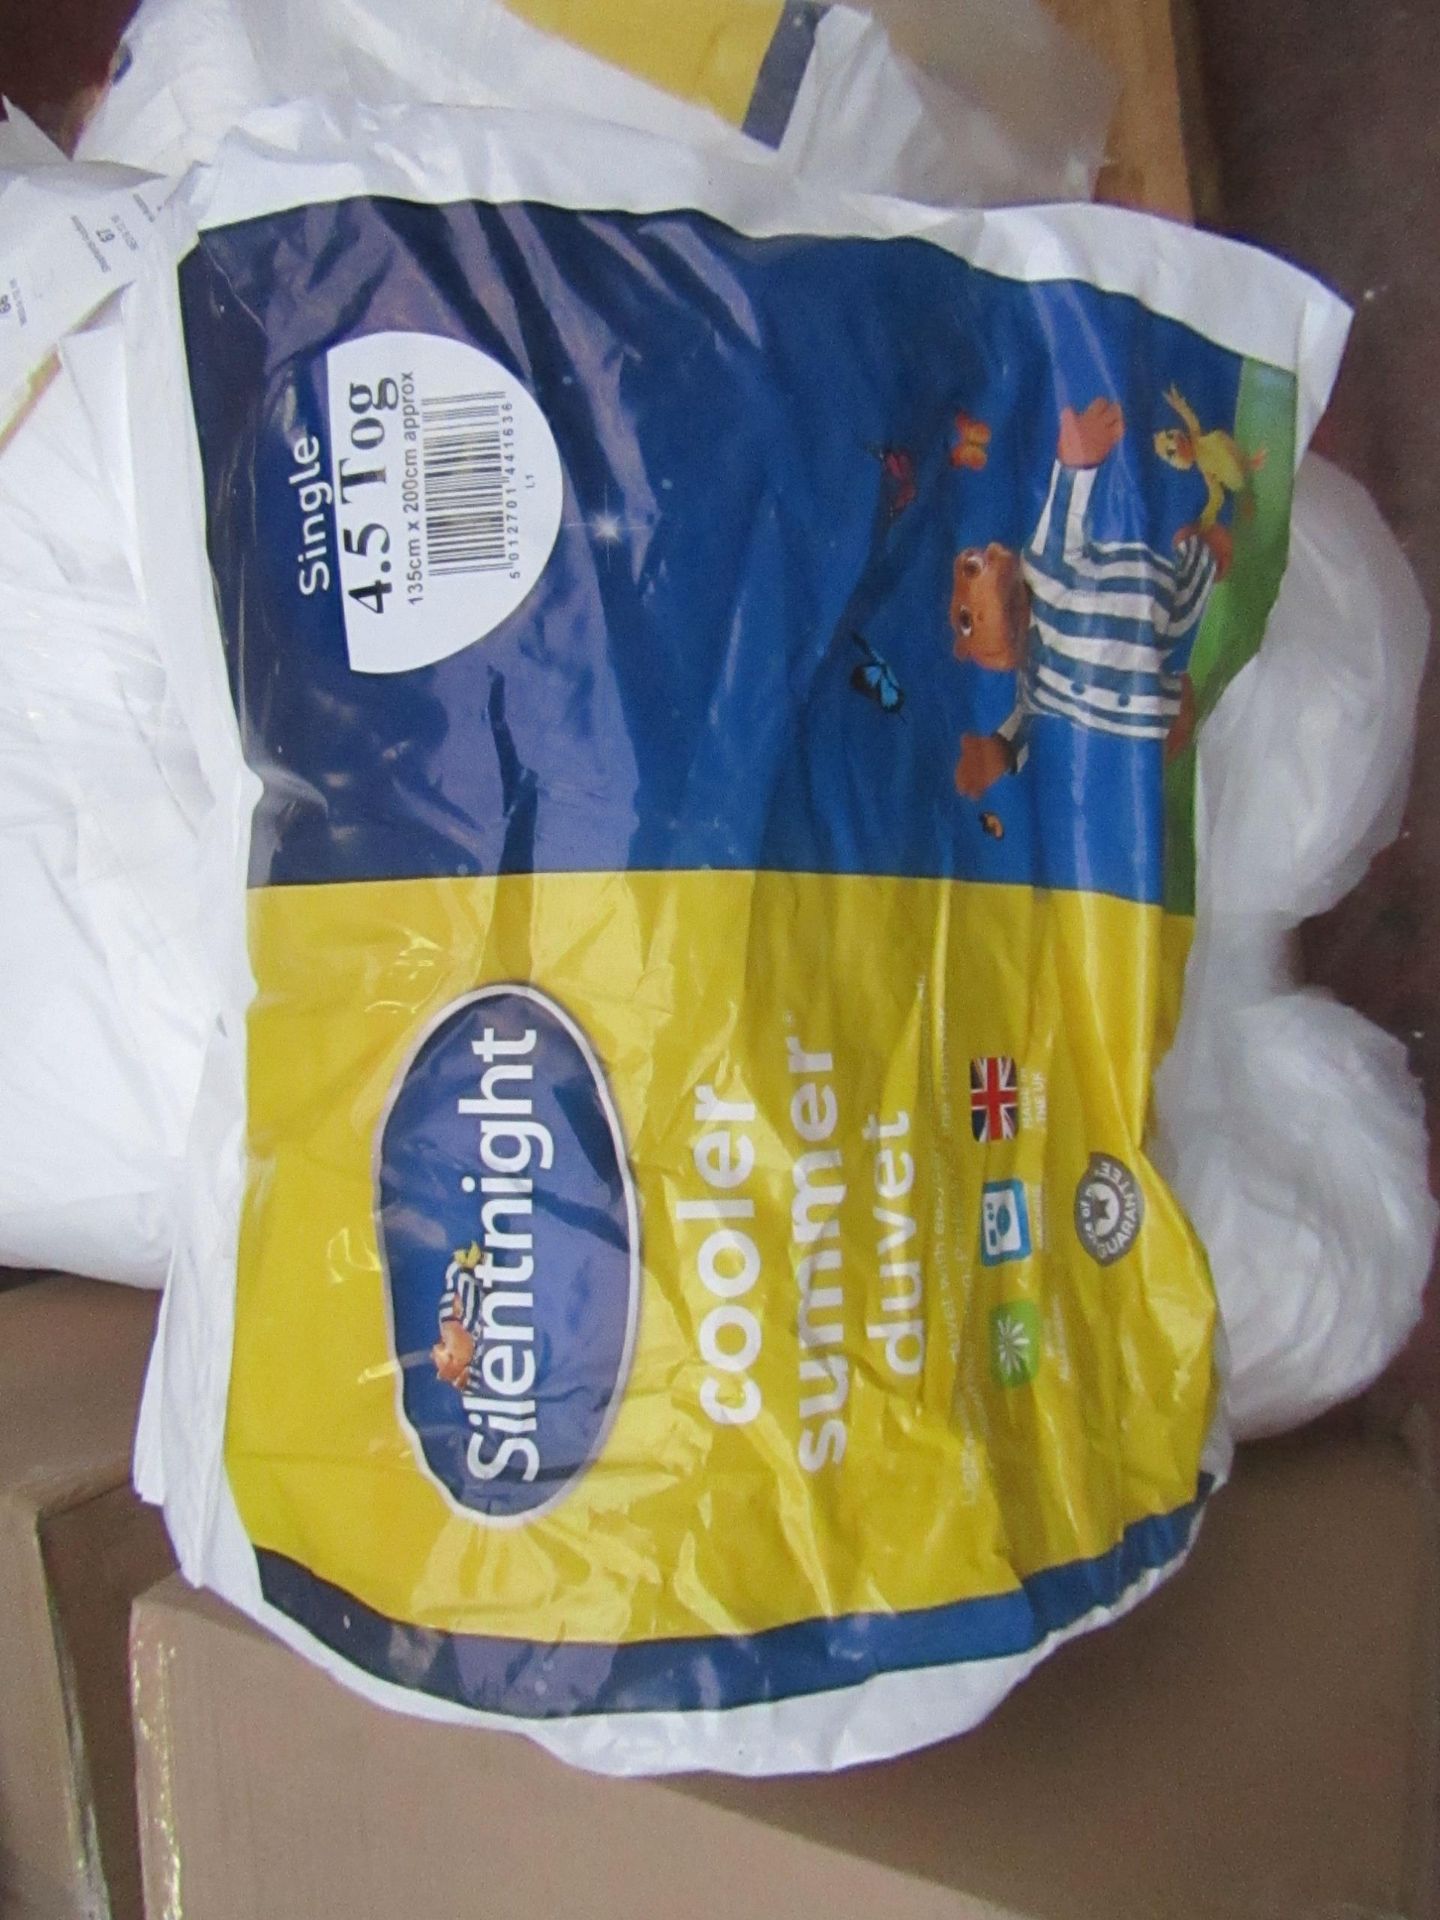 Silent Night Cooler Summer duvet Single size 4.5 Tog, all brand new and packaged.  Each RRP £14.99